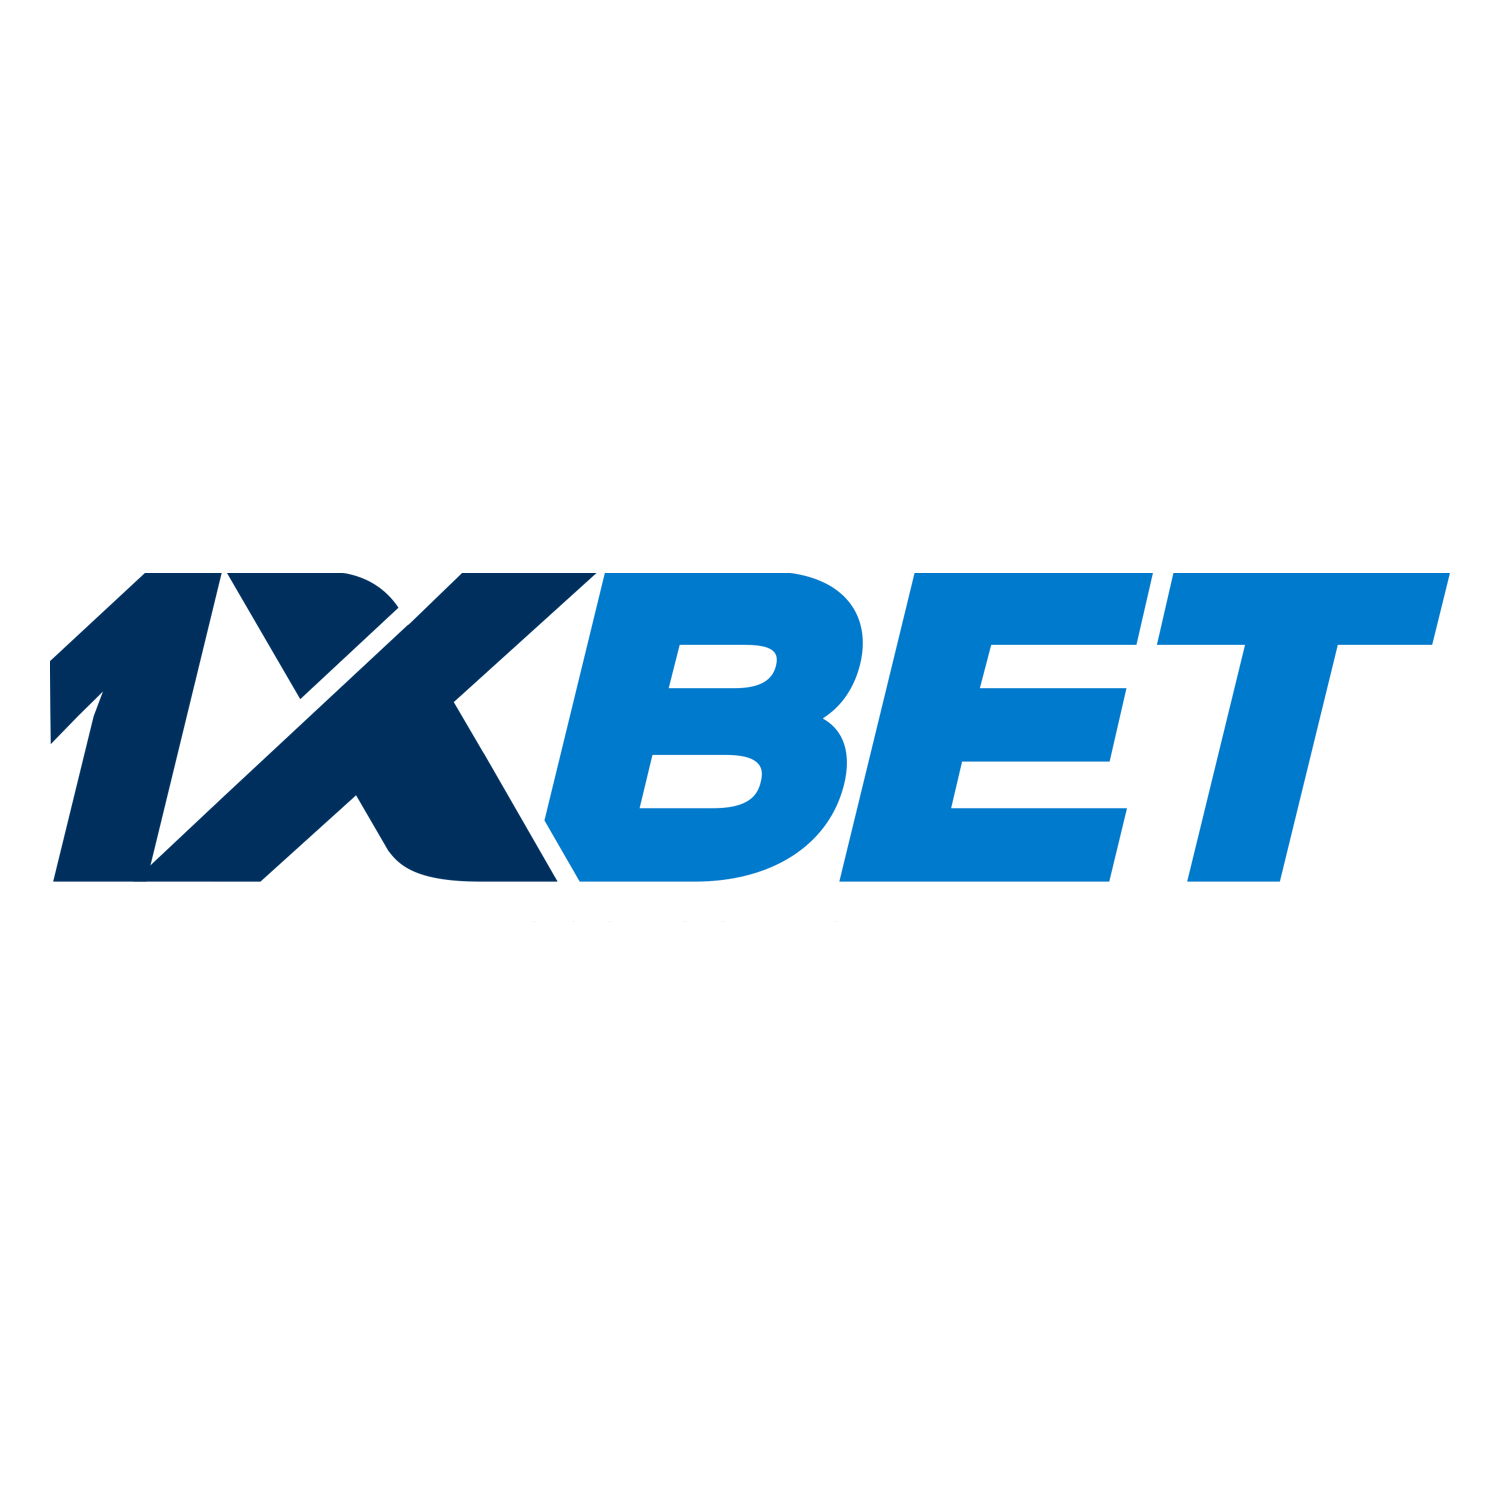 Indian users enjoy betting on 1xbet for the variety of betting options and the odds.